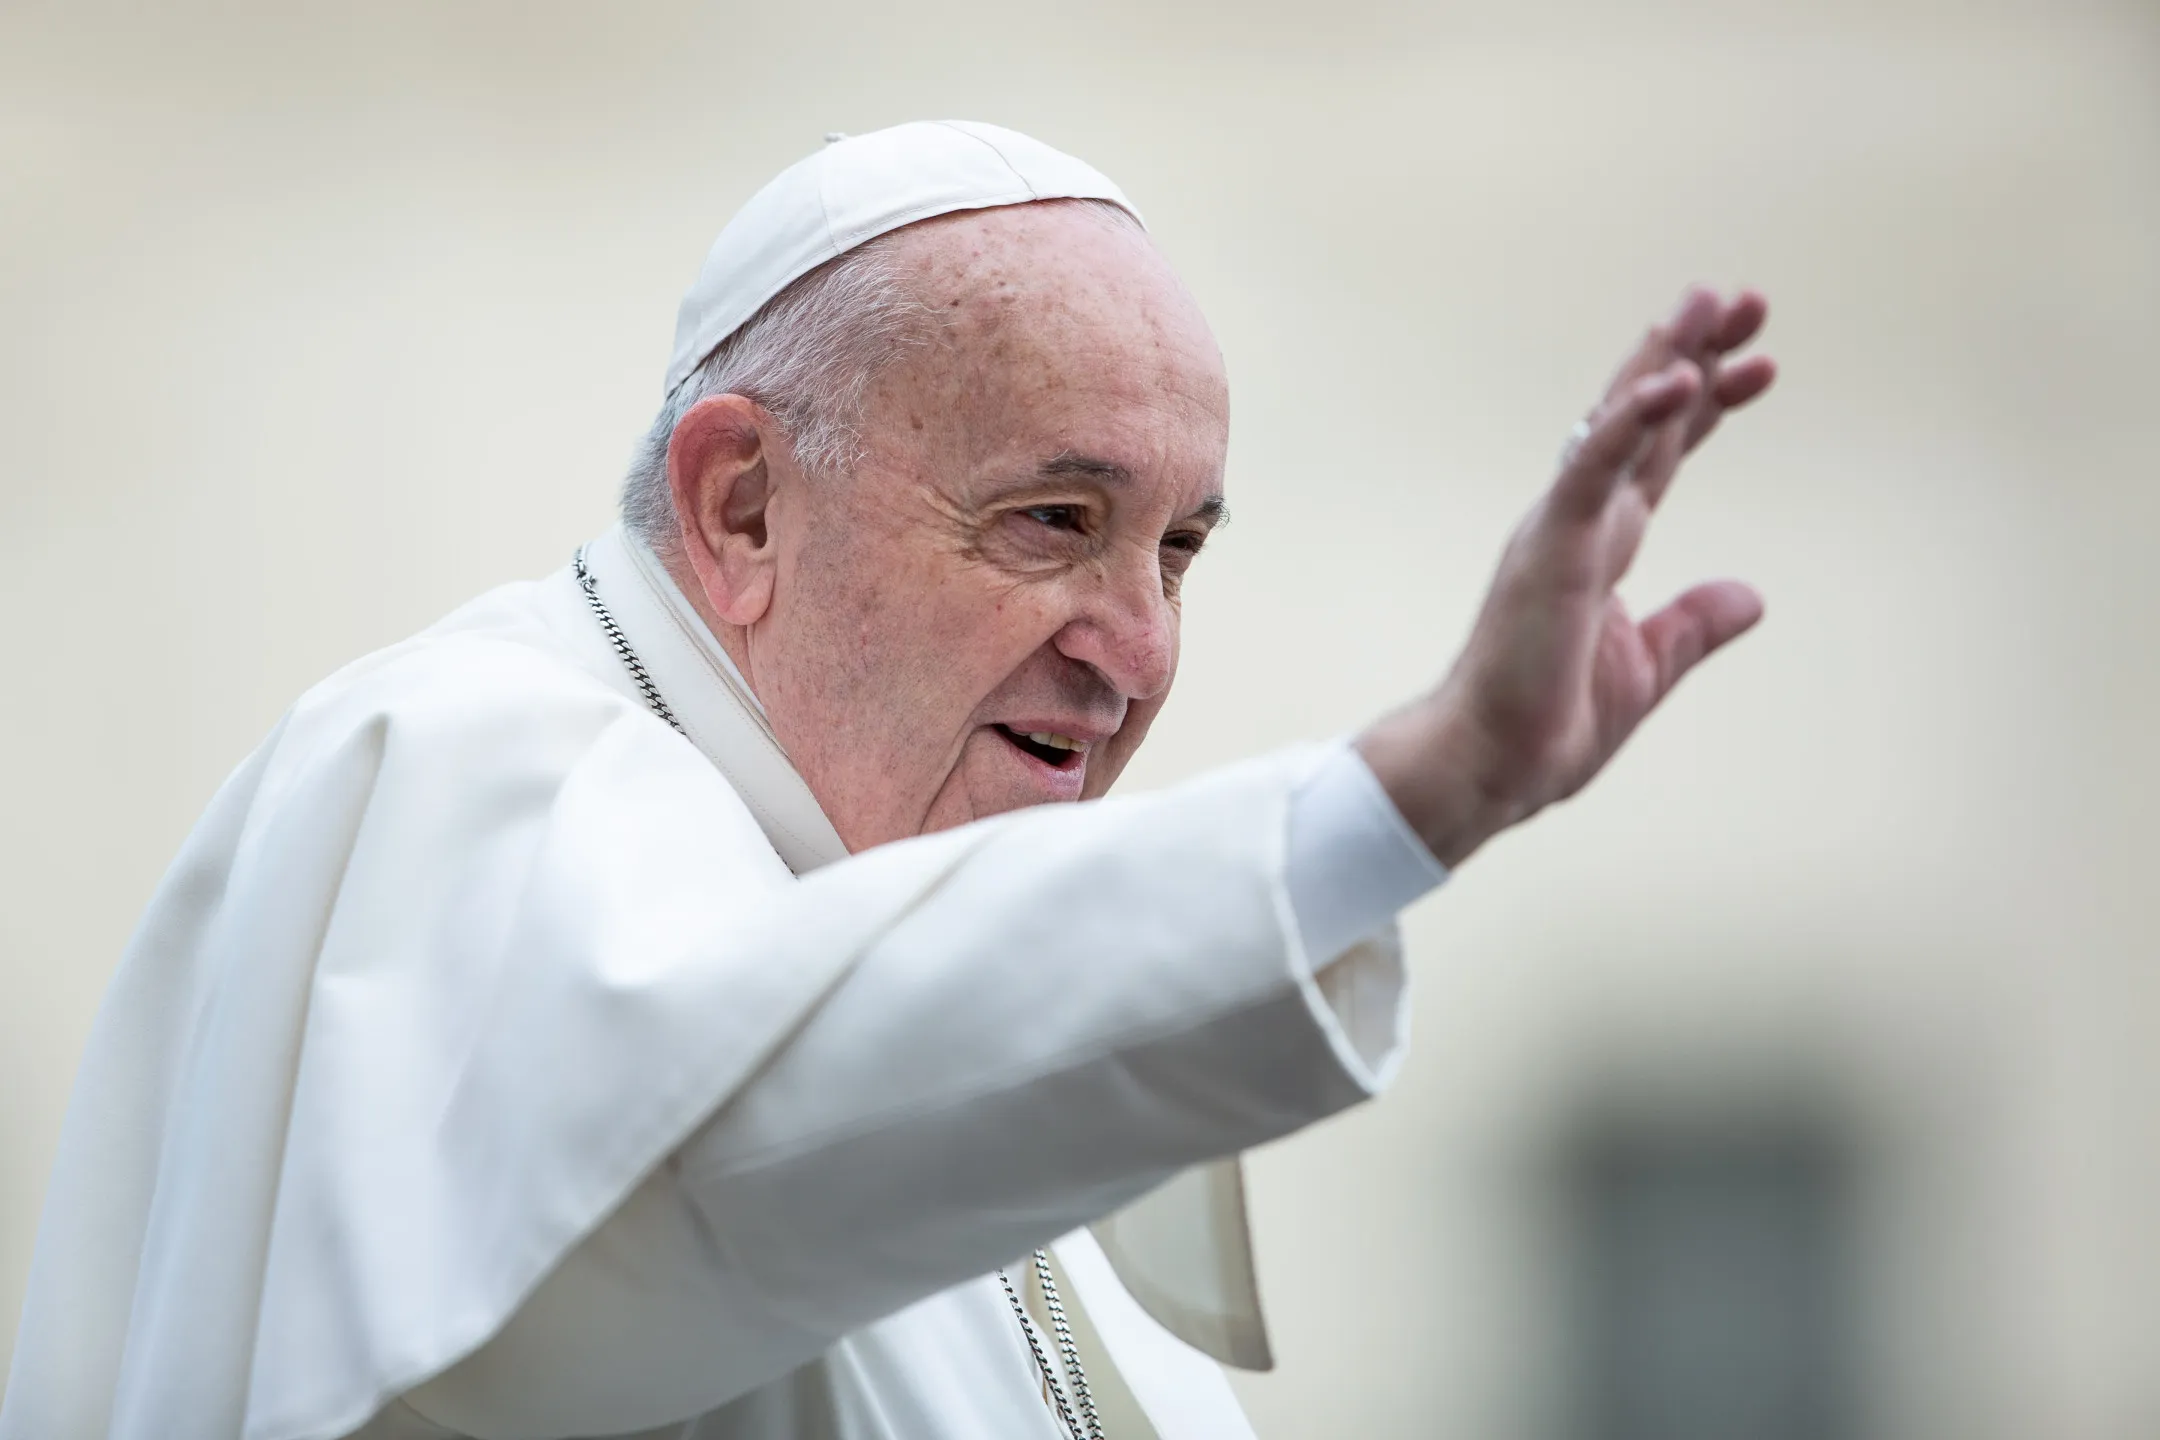 Pope Francis greets pilgrims in St. Peter's Square on Feb. 26, 2020.?w=200&h=150